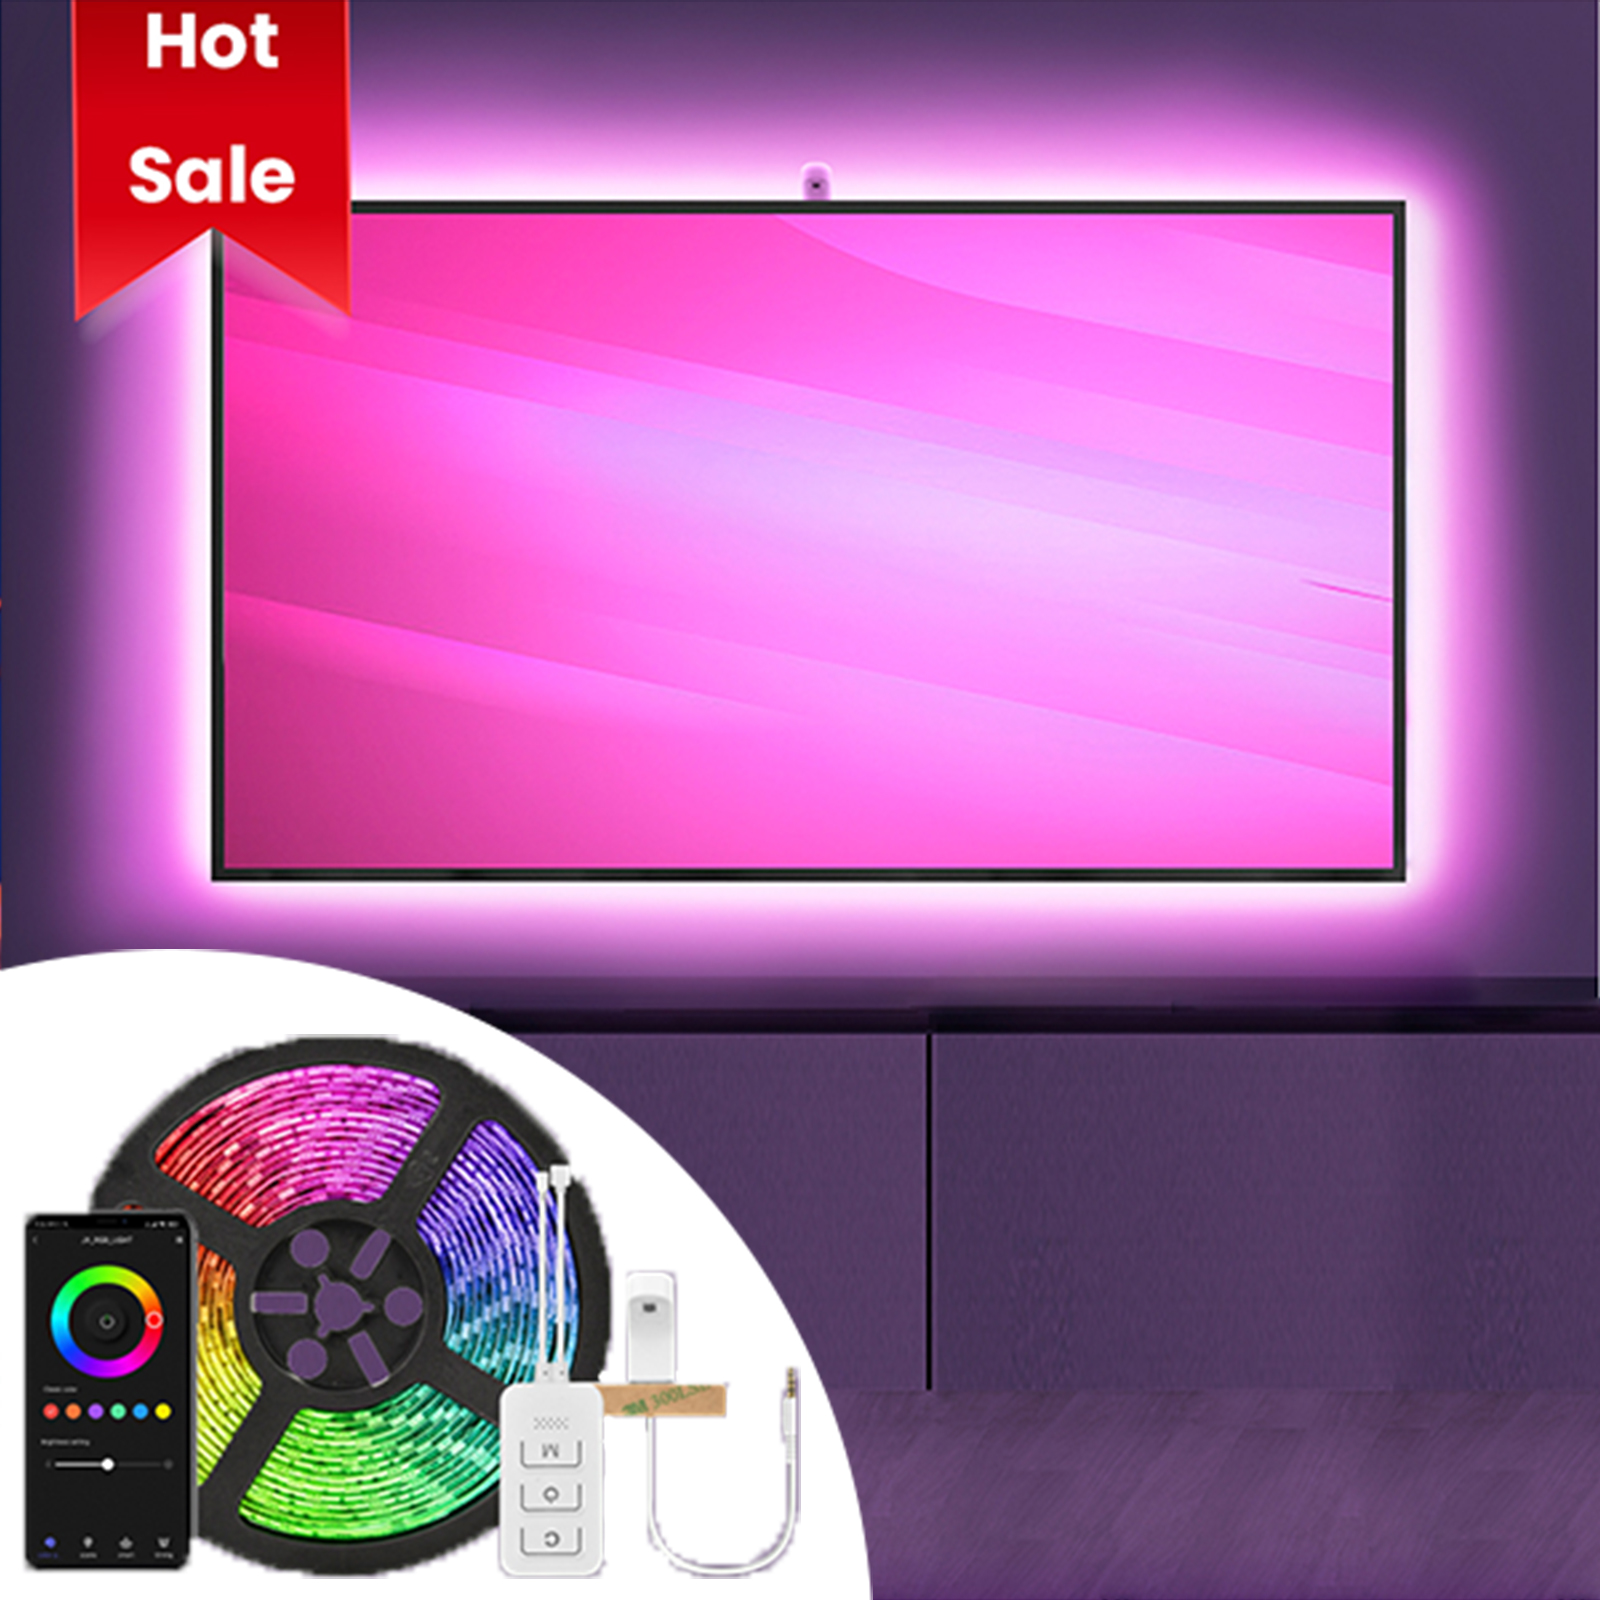 Smart-LR1321 Hot Selling RGB Dimming TV Backlight with Sensor and Adapter China Factory Manufacturer – Yourlite Featured Image